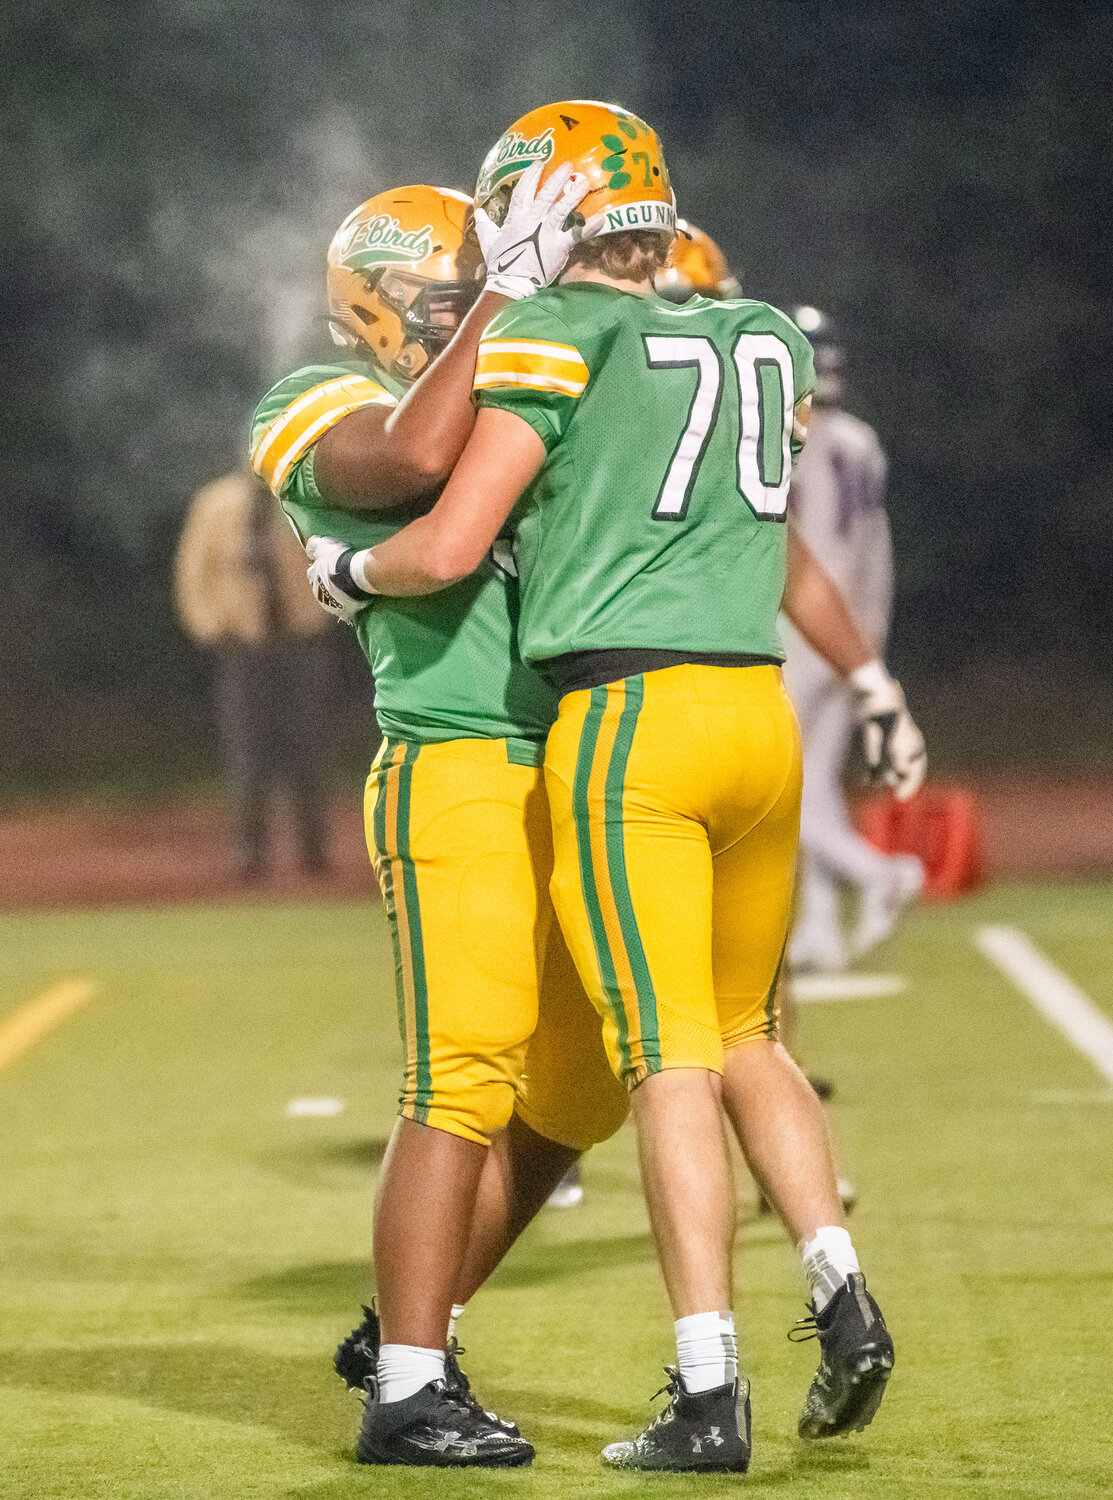 Tumwater’s Malijah Tucker hugs Nathan Boone (70) after a defensive play during a 2A state semifinal game on Saturday.